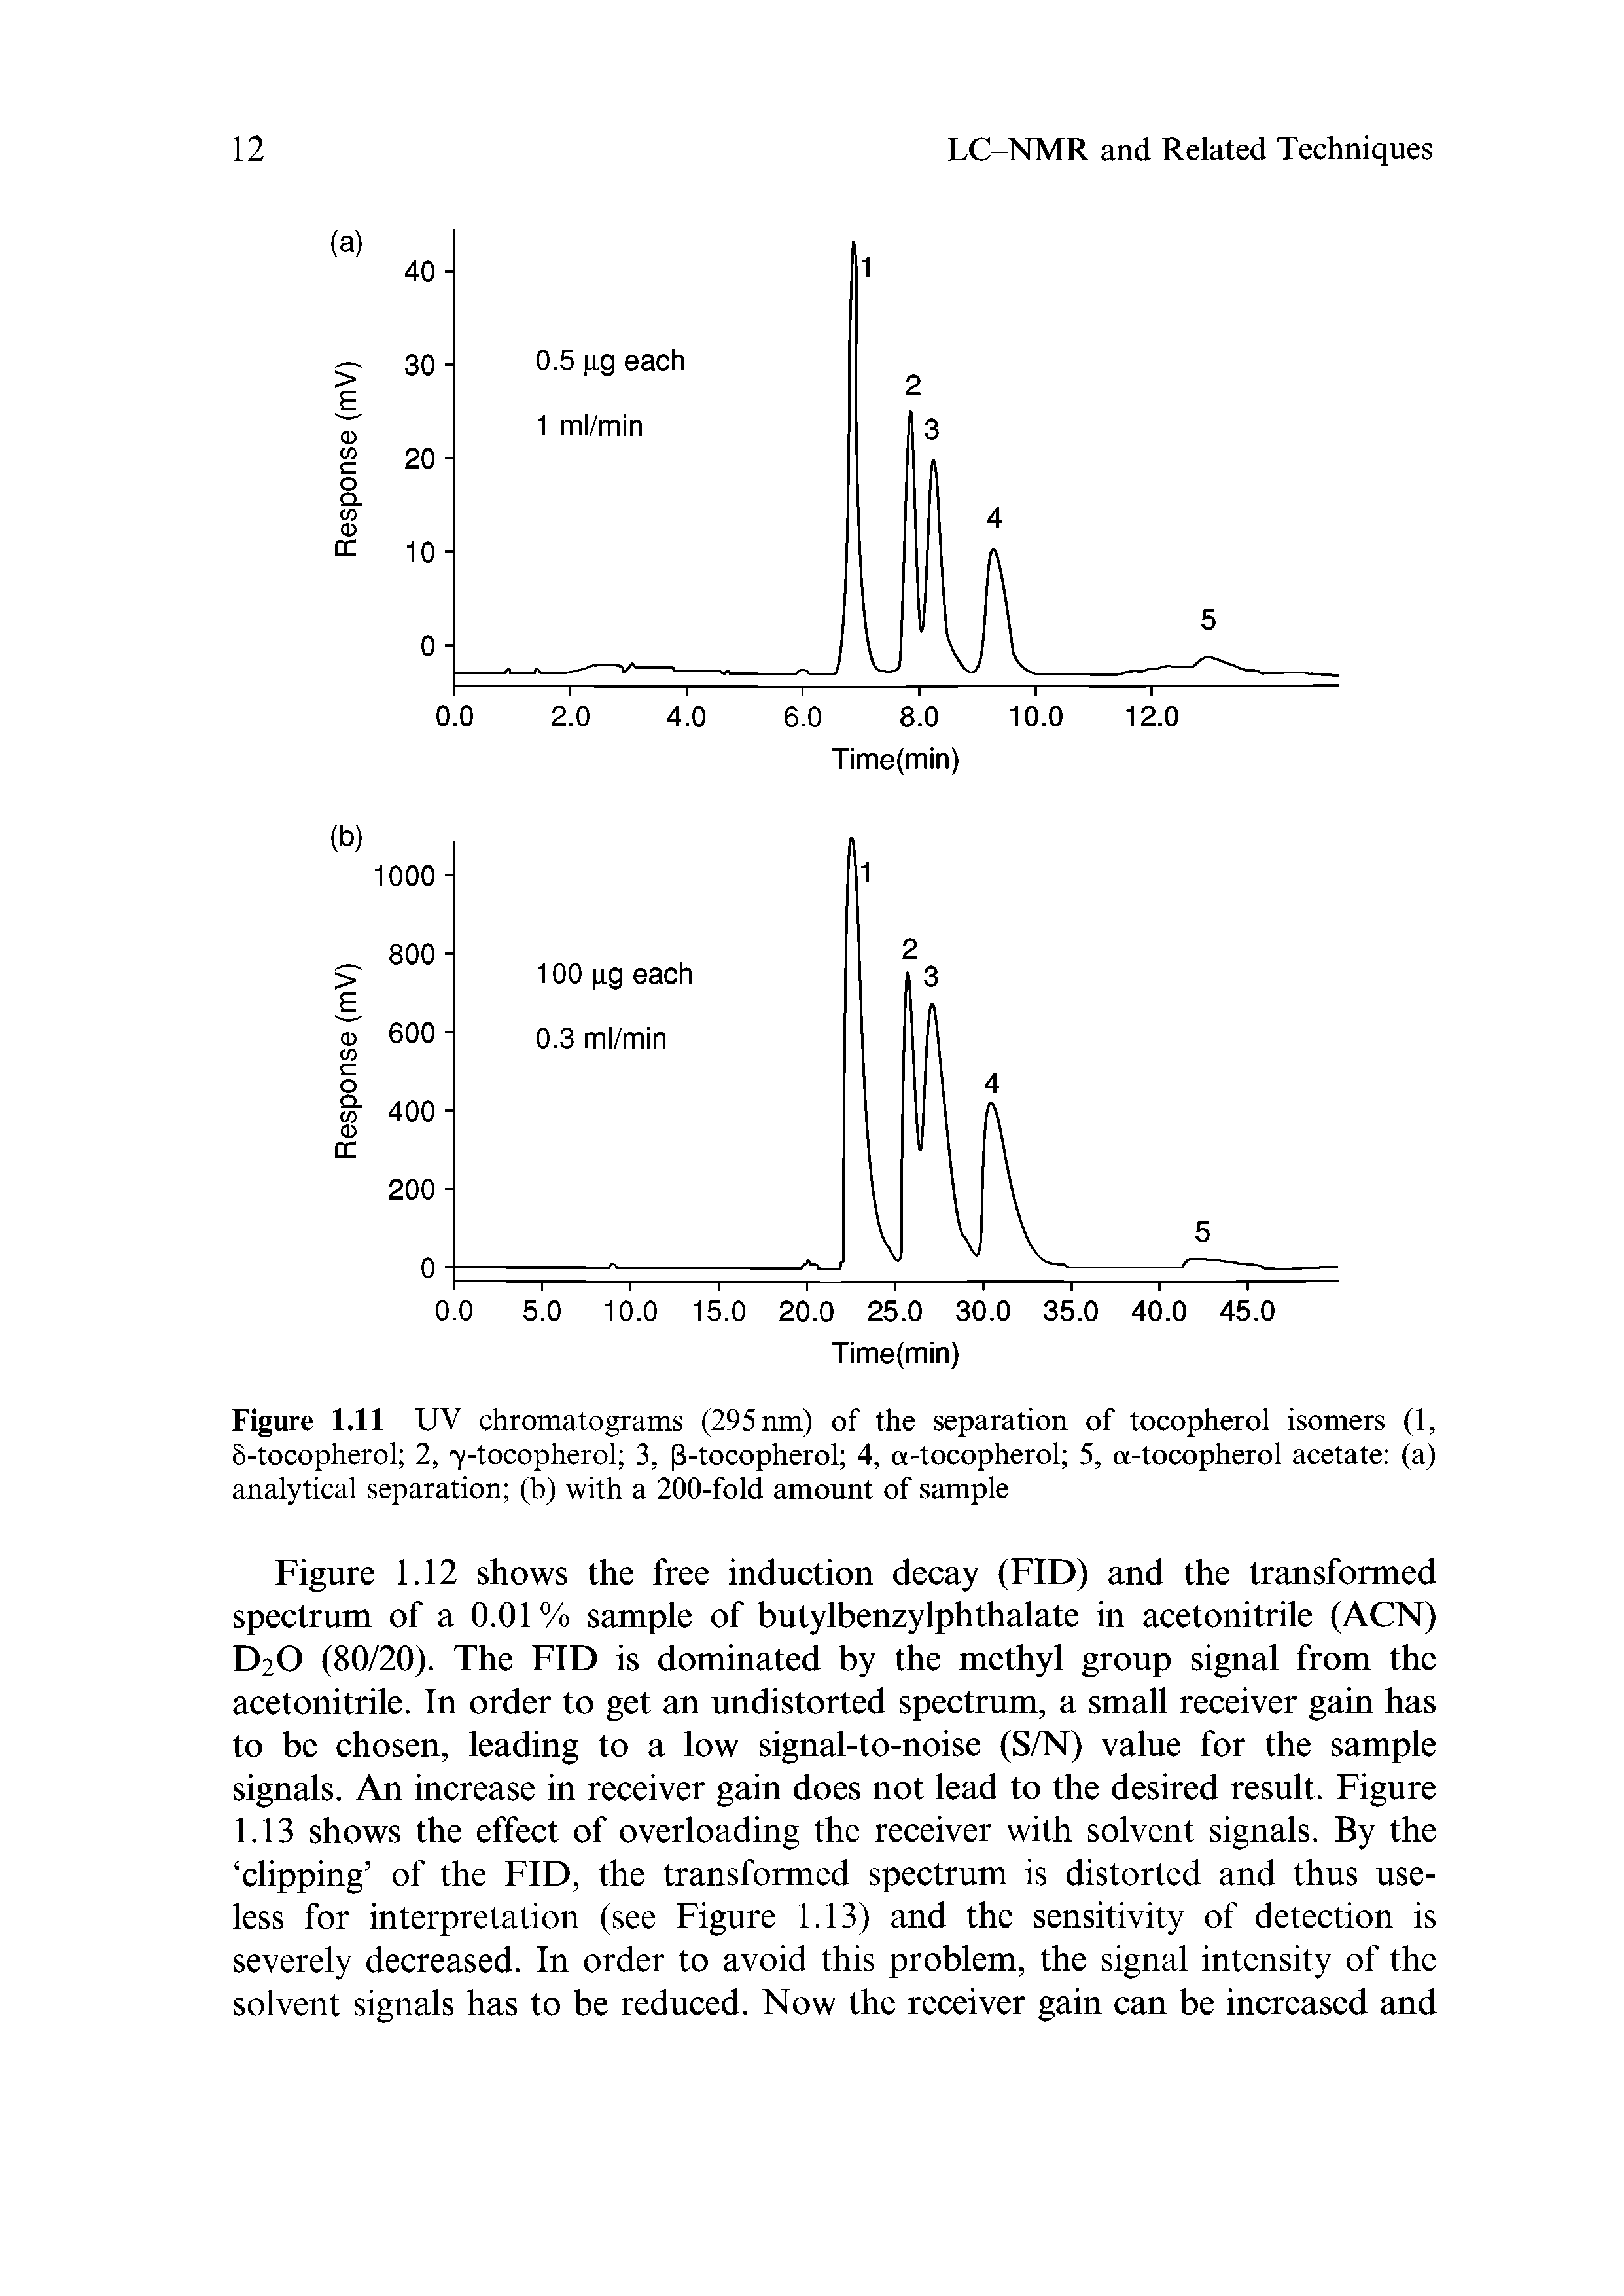 Figure 1.11 UV chromatograms (295 nm) of the separation of tocopherol isomers (1, 8-tocopherol 2, 7-tocopherol 3, (3-tocopherol 4, a-tocopherol 5, a-tocopherol acetate (a) analytical separation (b) with a 200-fold amount of sample...